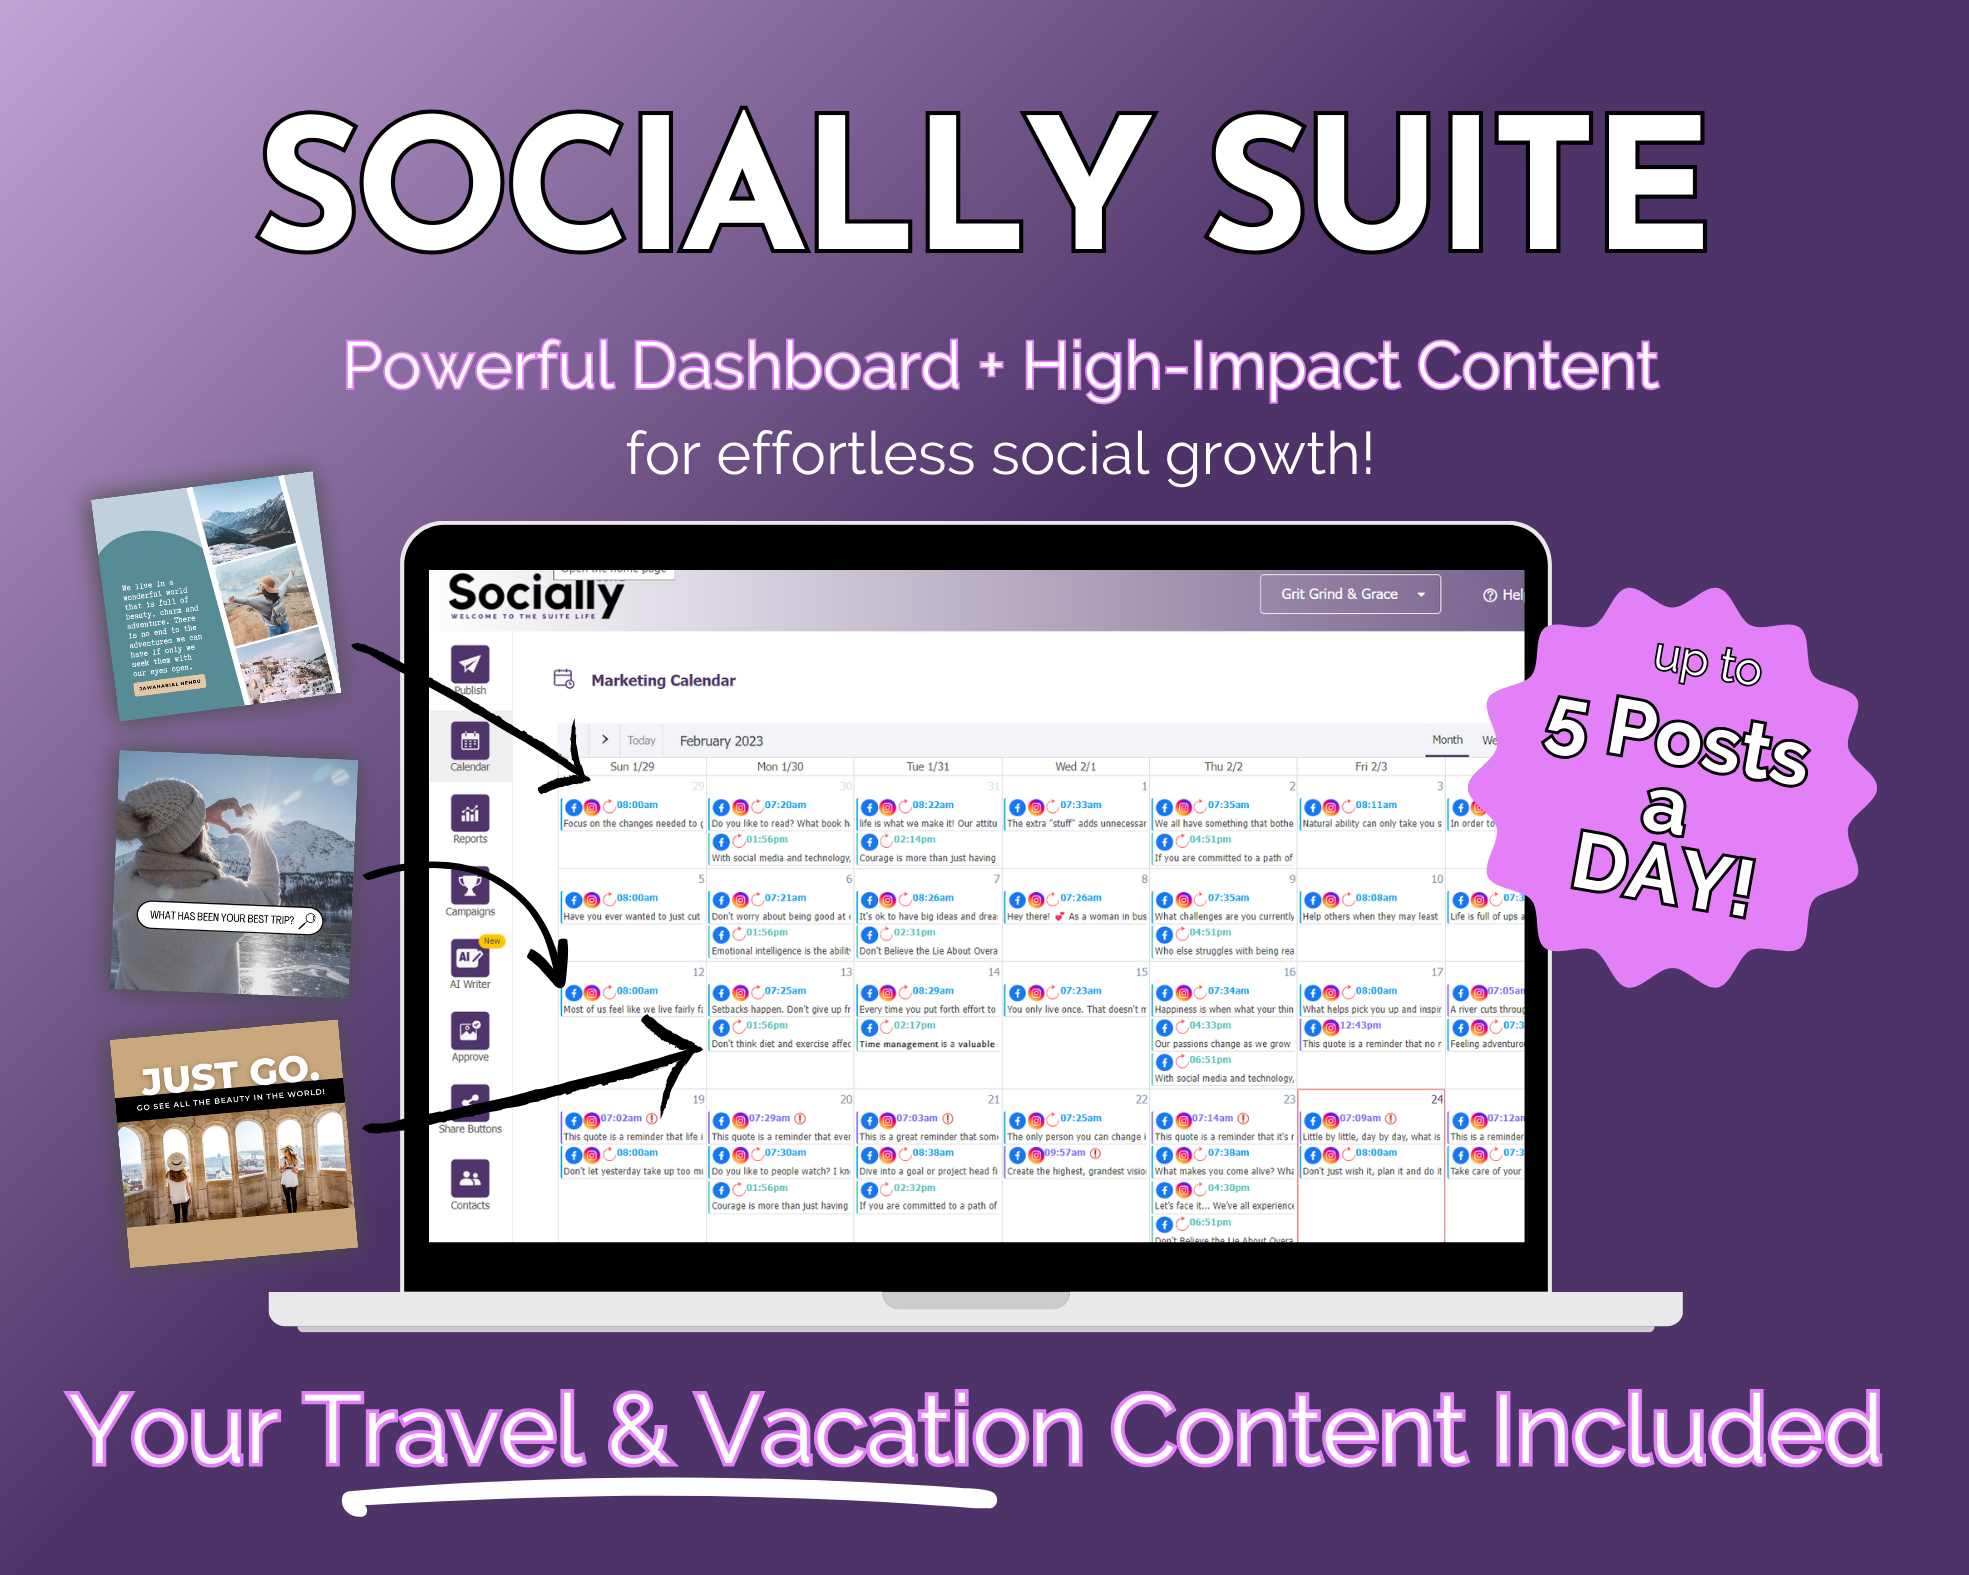 Digital marketing content presentation featuring a "Get Socially Inclined" content dashboard for managing social media posts with an emphasis on travel and vacation content, advertising up to 5 posts a day.